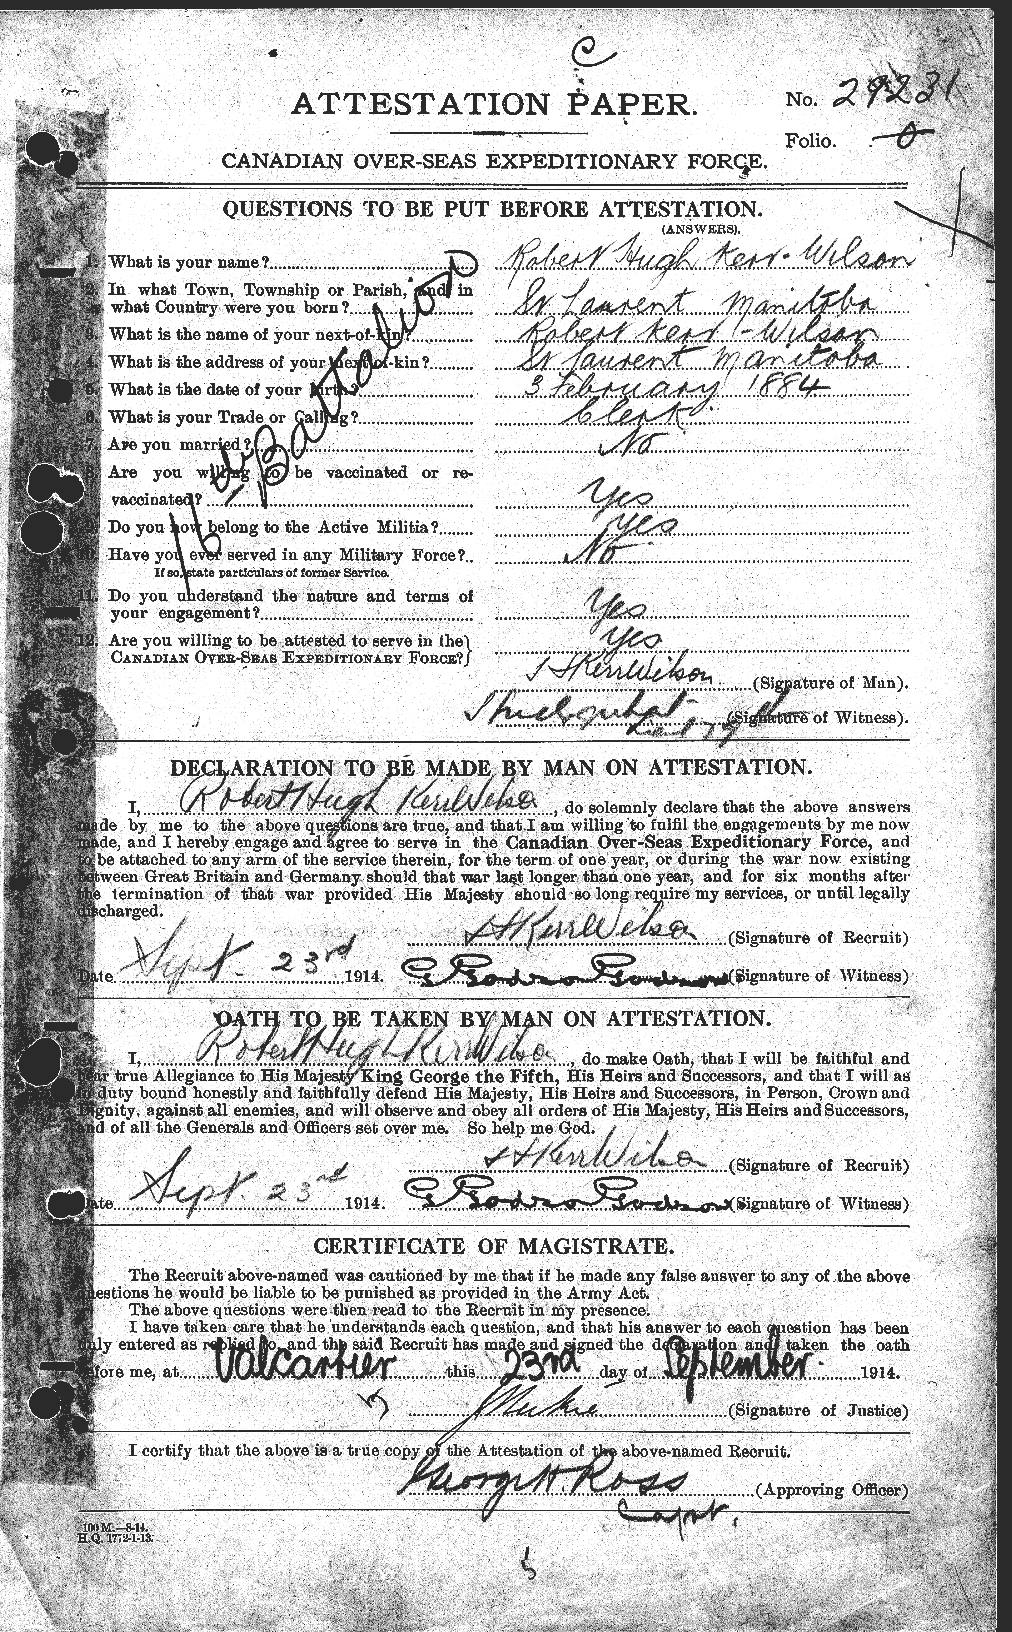 Personnel Records of the First World War - CEF 431775a